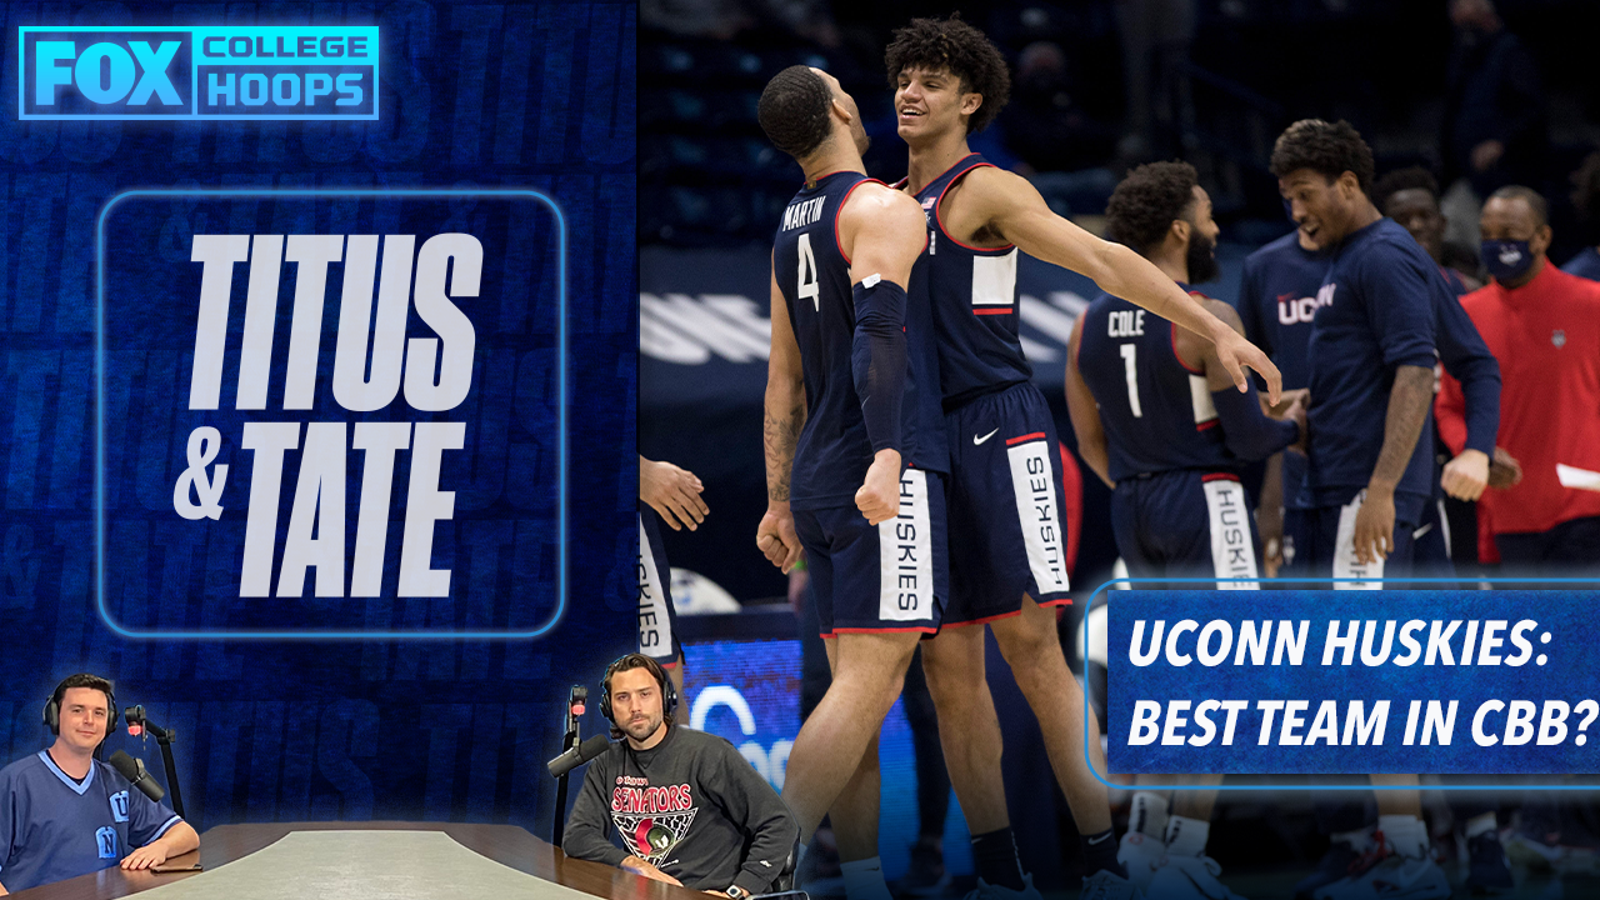 Are the UConn Huskies the best team in college basketball?